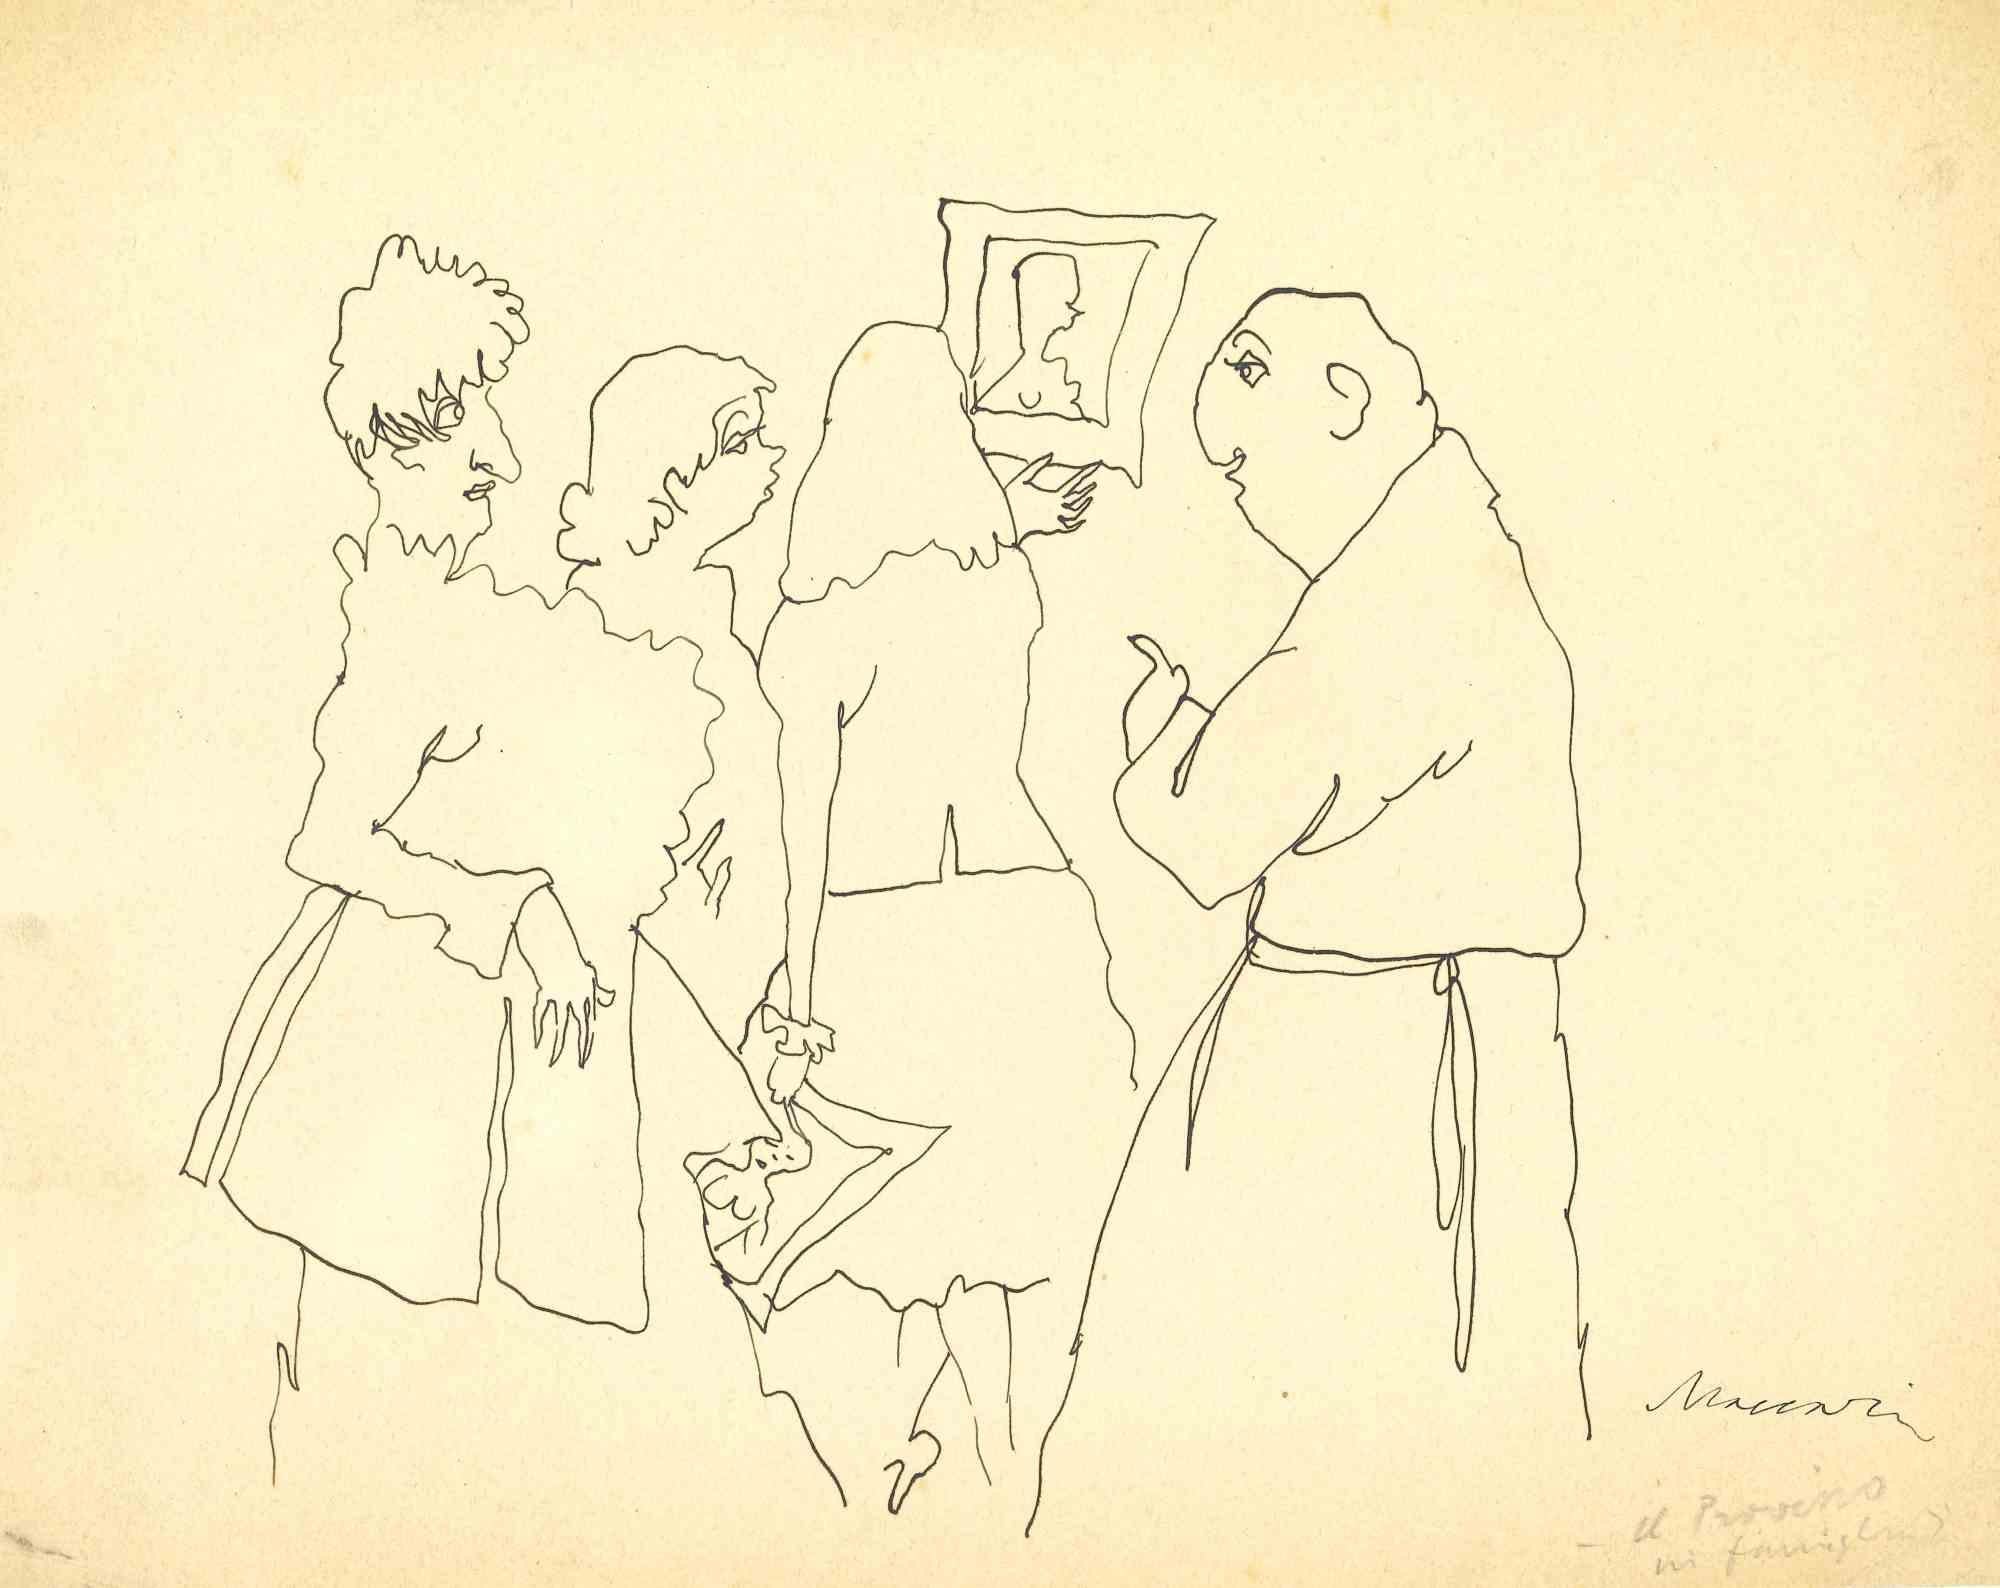 The Exhibition is a China ink Drawing realized by Mino Maccari  (1924-1989) in the 1960s.

Hand-signed on the lower.

Good condition.

Mino Maccari (Siena, 1924-Rome, June 16, 1989) was an Italian writer, painter, engraver and journalist, winner of